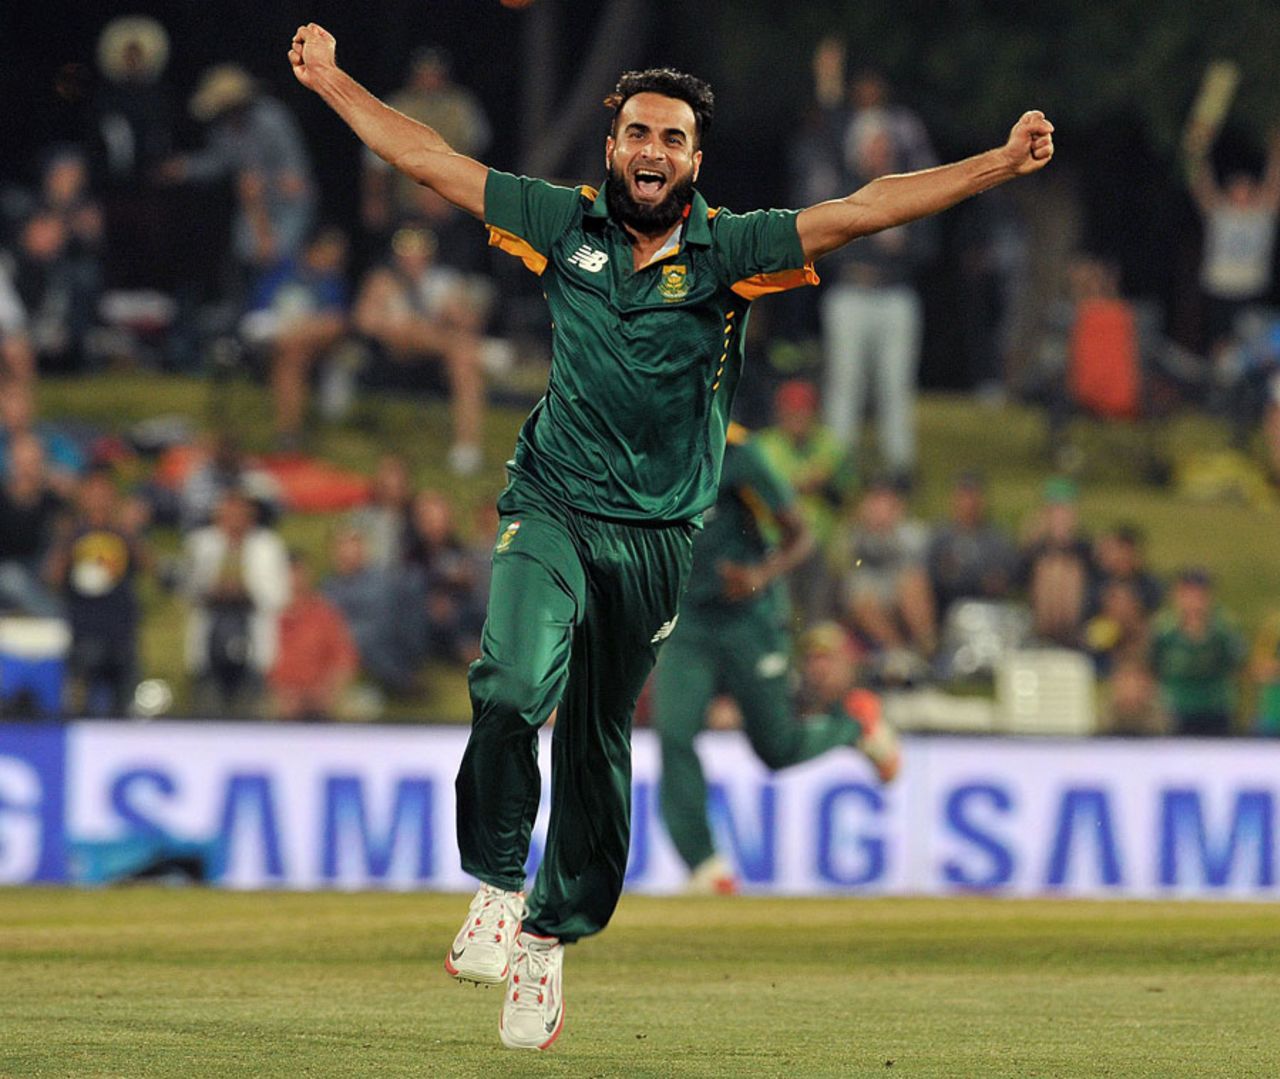 Imran Tahir is ecstatic after taking the wicket of Kane Williamson, South Africa v New Zealand, 1st ODI, Centurion, August 19, 2015